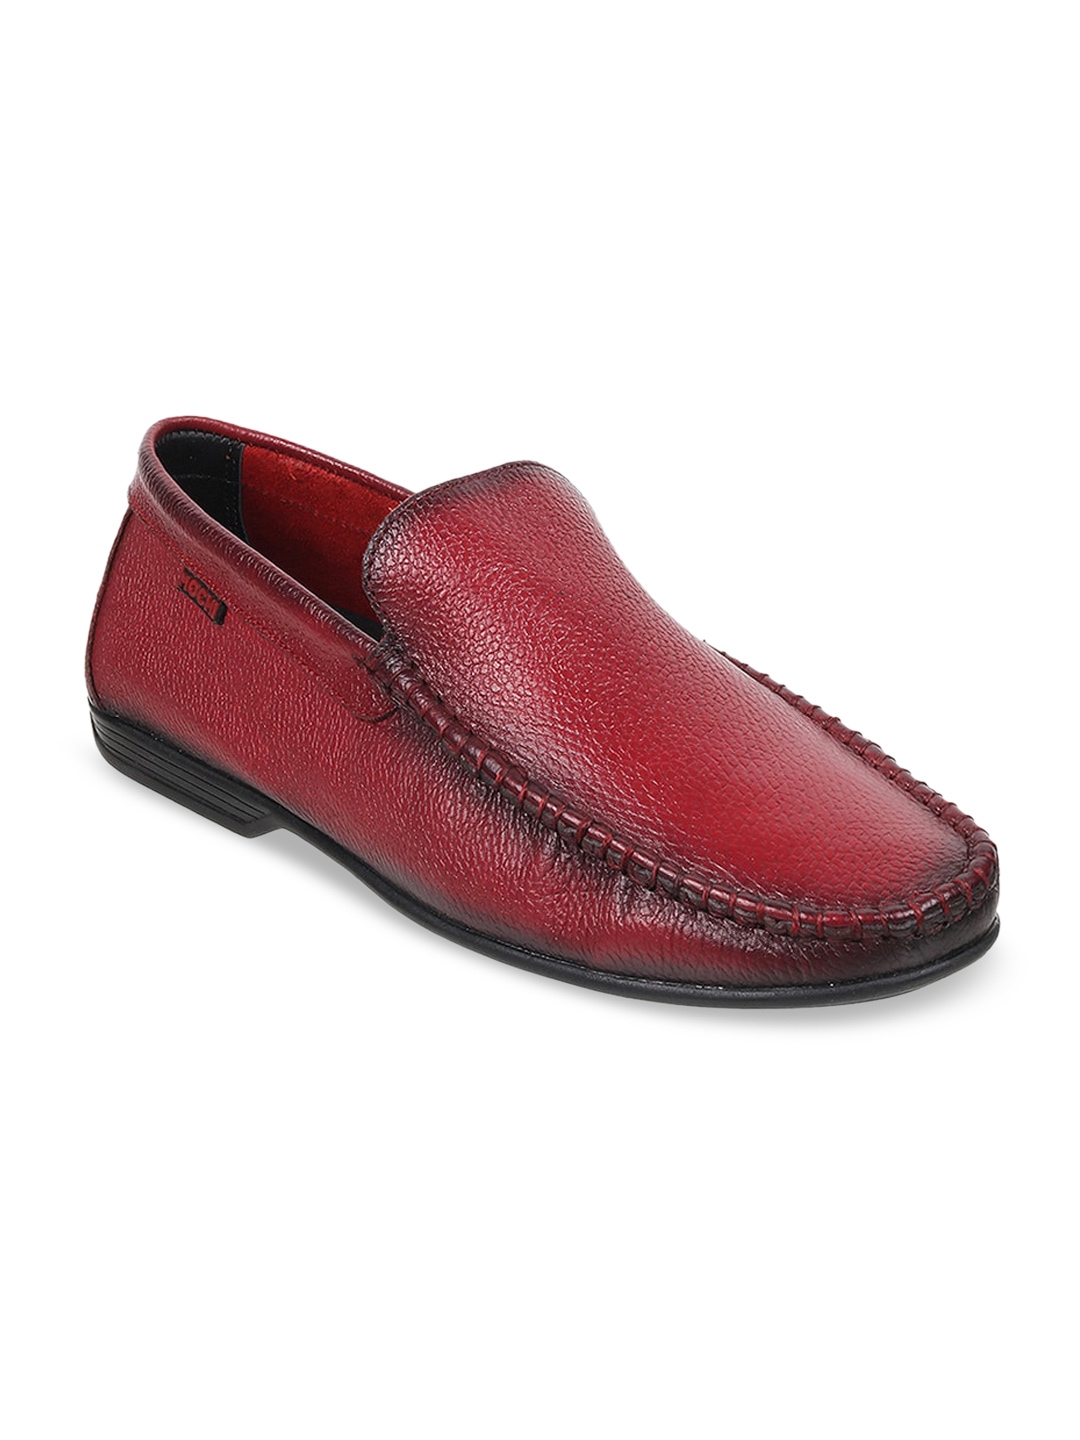 

Mochi Men Textured Leather Comfort Insole Basics Loafers, Maroon